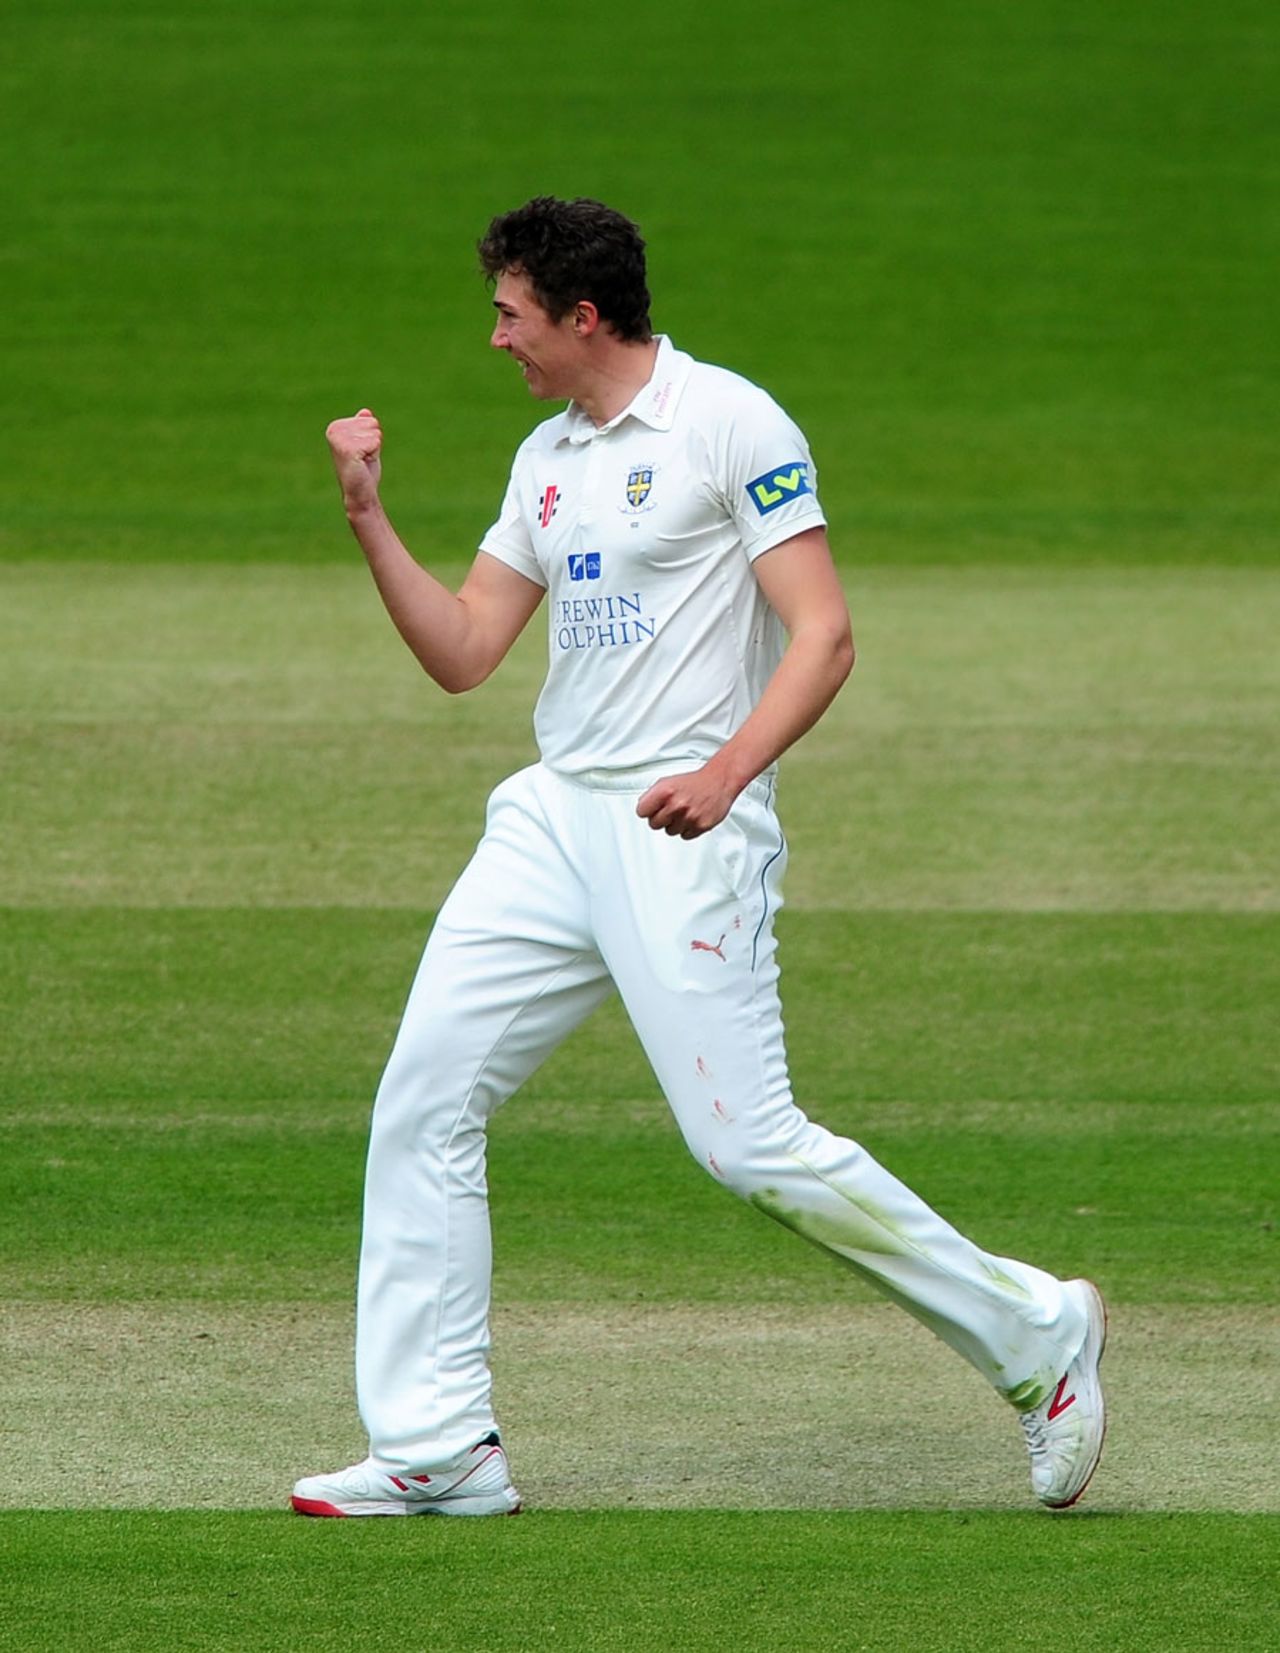 Paul Coughlin made the opening breakthrough, Middlesex v Durham, County Championship, Division One, Lord's, 1st day, May 2, 2015